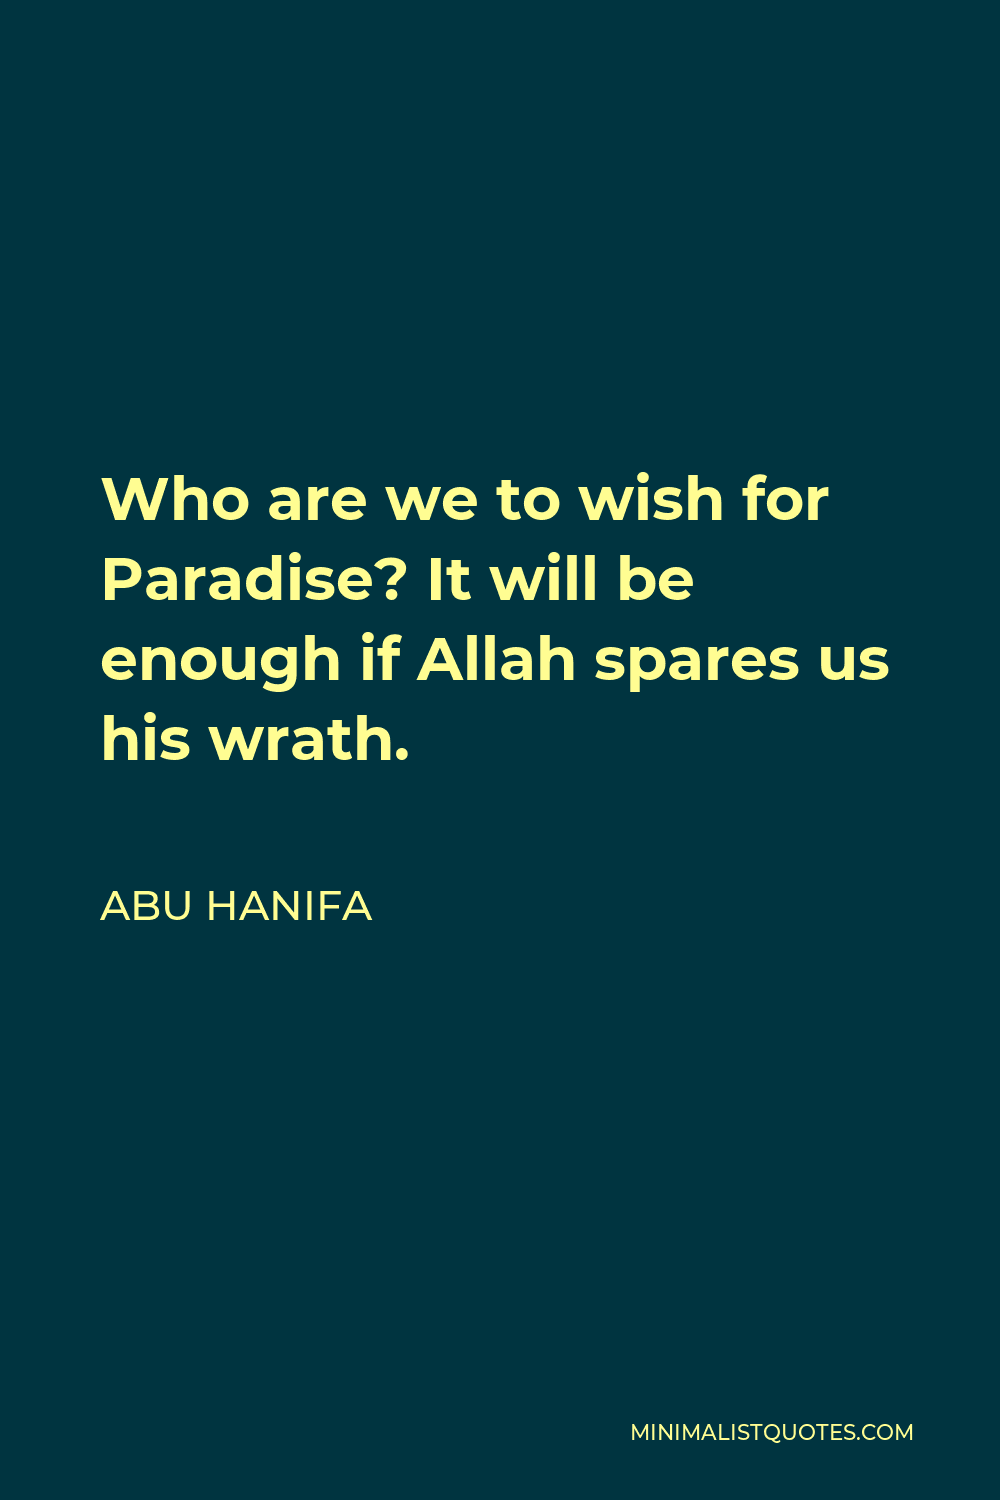 Abu Hanifa Quote - Who are we to wish for Paradise? It will be enough if Allah spares us his wrath.